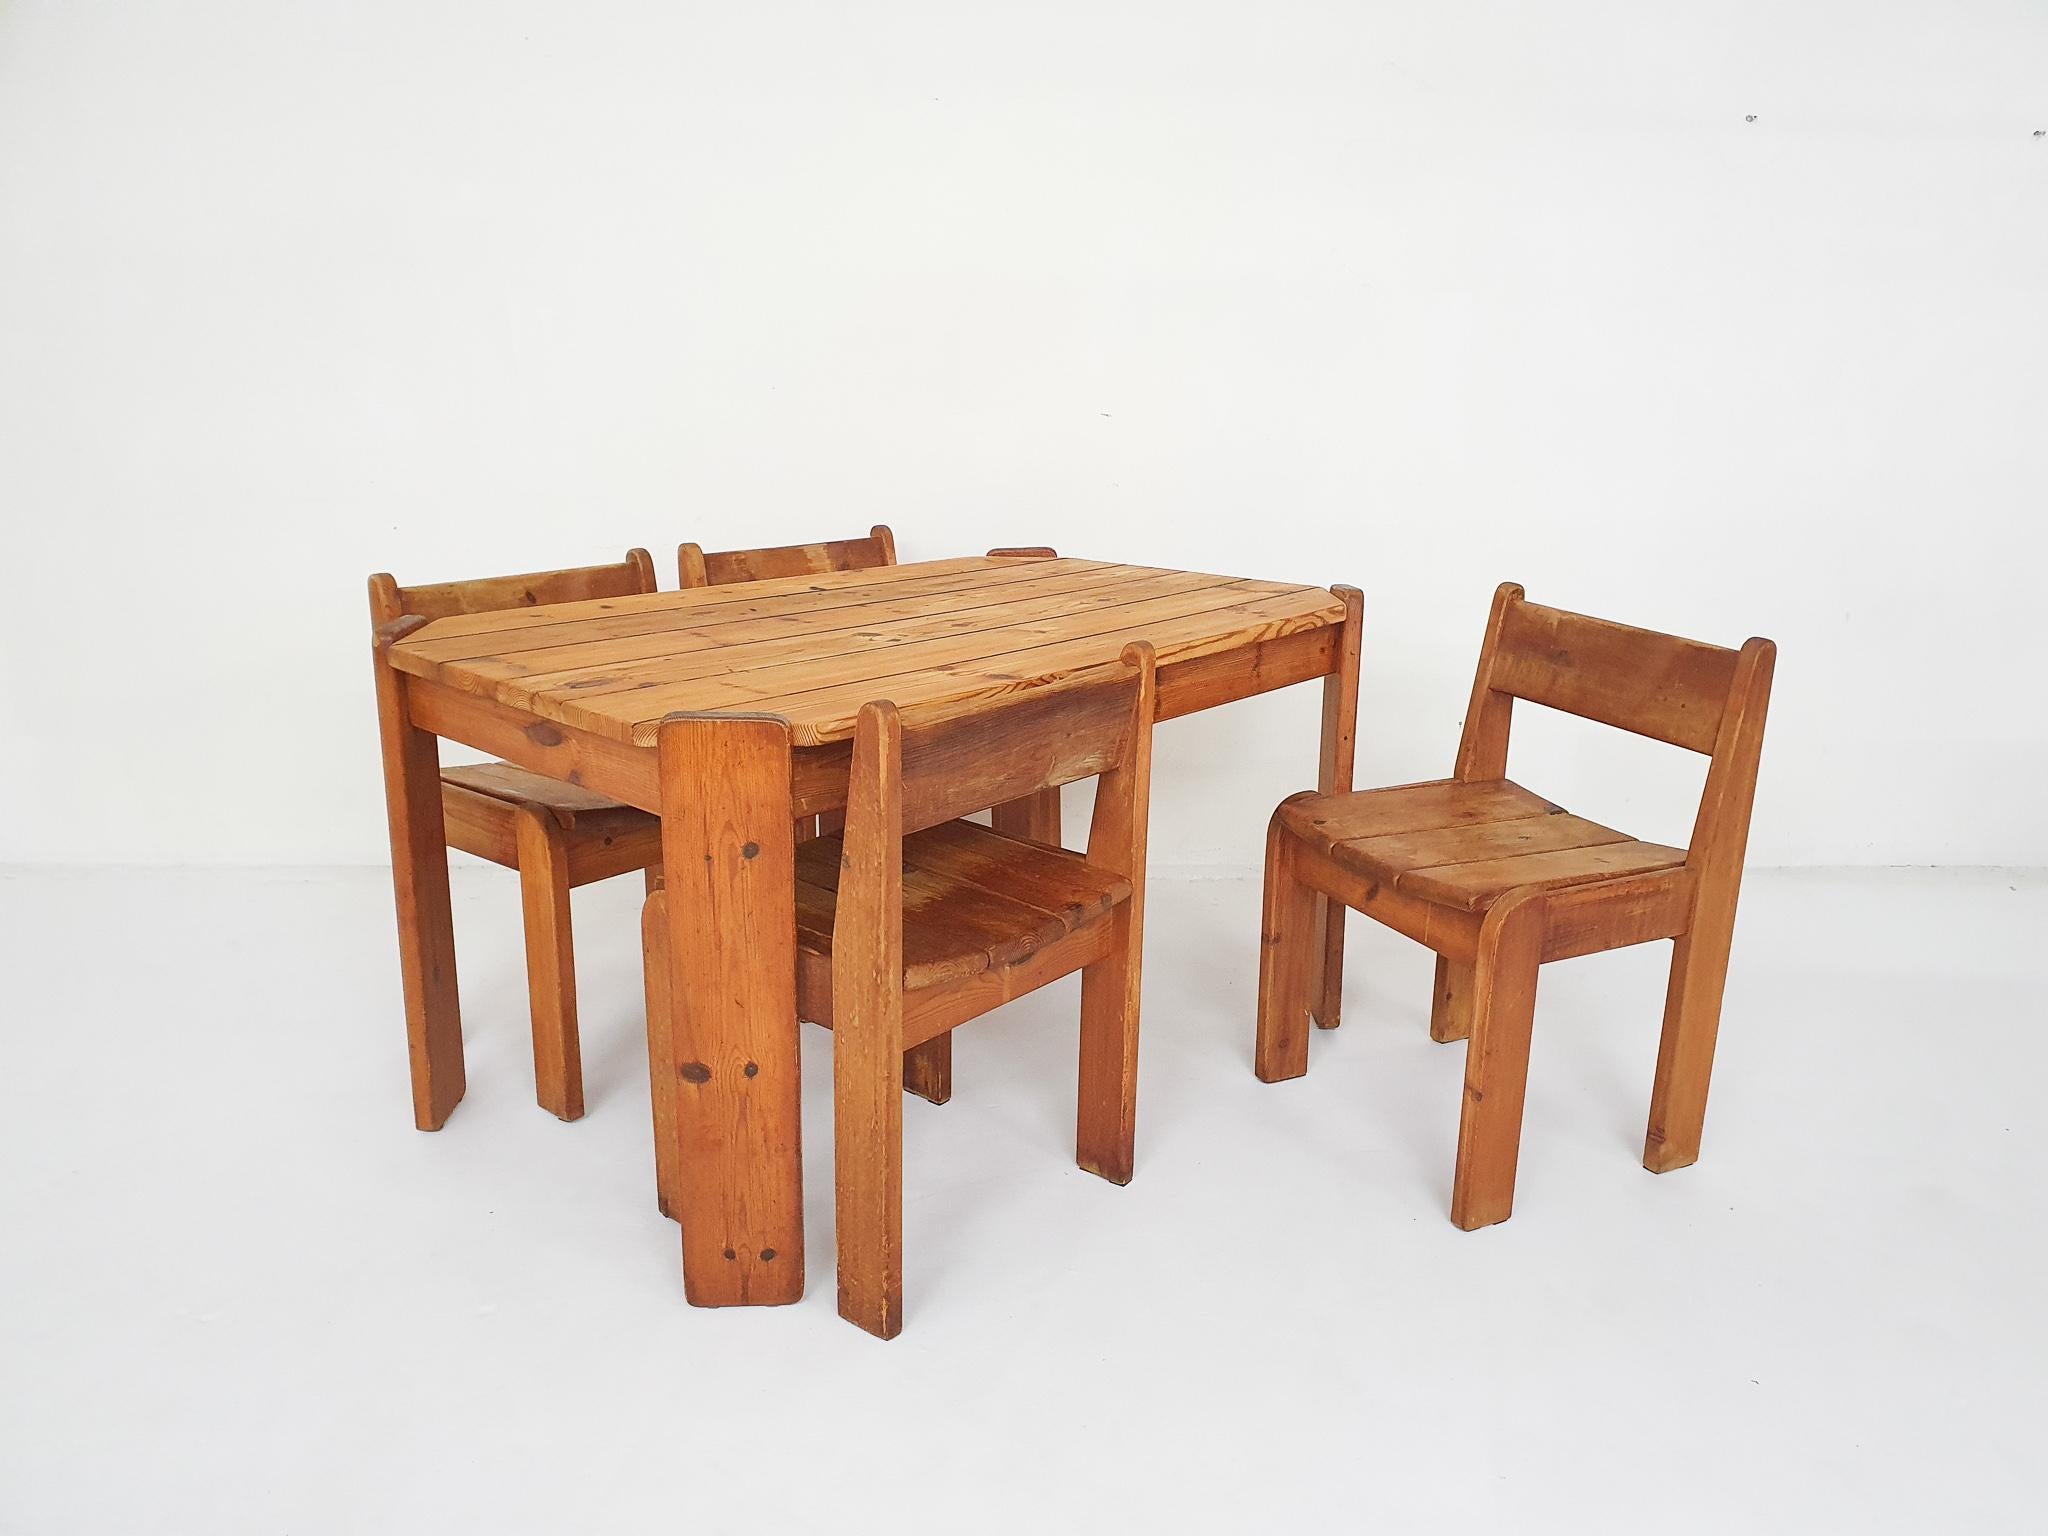 Pinewood dining table attrb. to Ate van Apeldoorn, The Netherlands 1970's For Sale 5